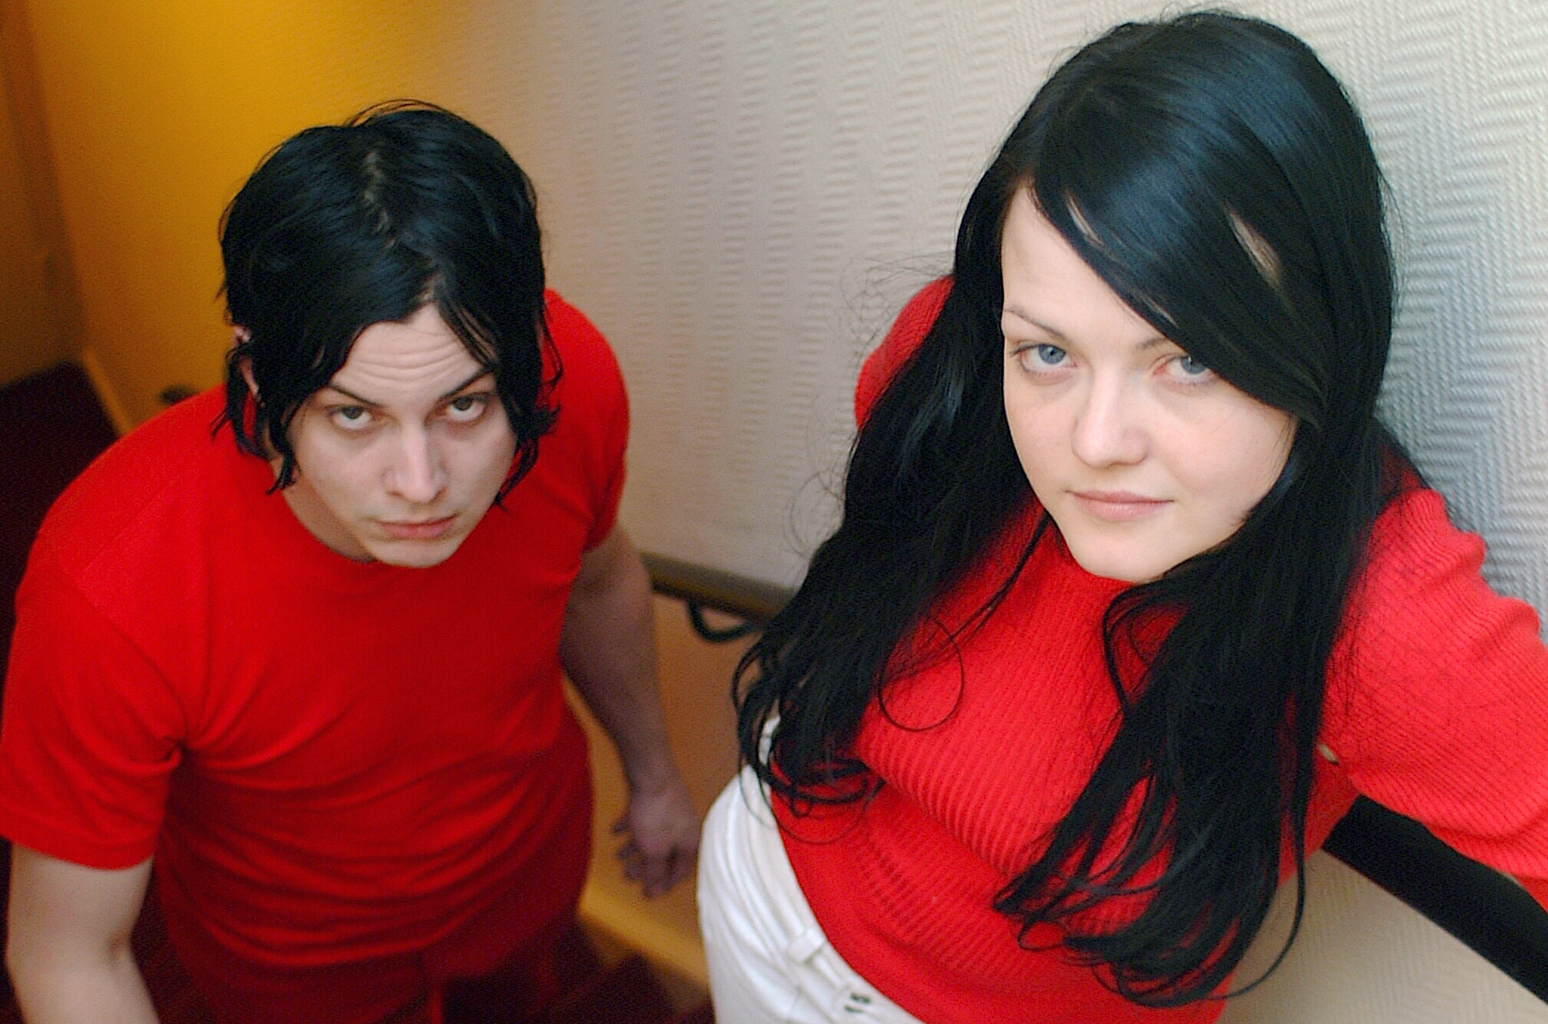 The White Stripes Backgrounds, Compatible - PC, Mobile, Gadgets| 1548x1024 px